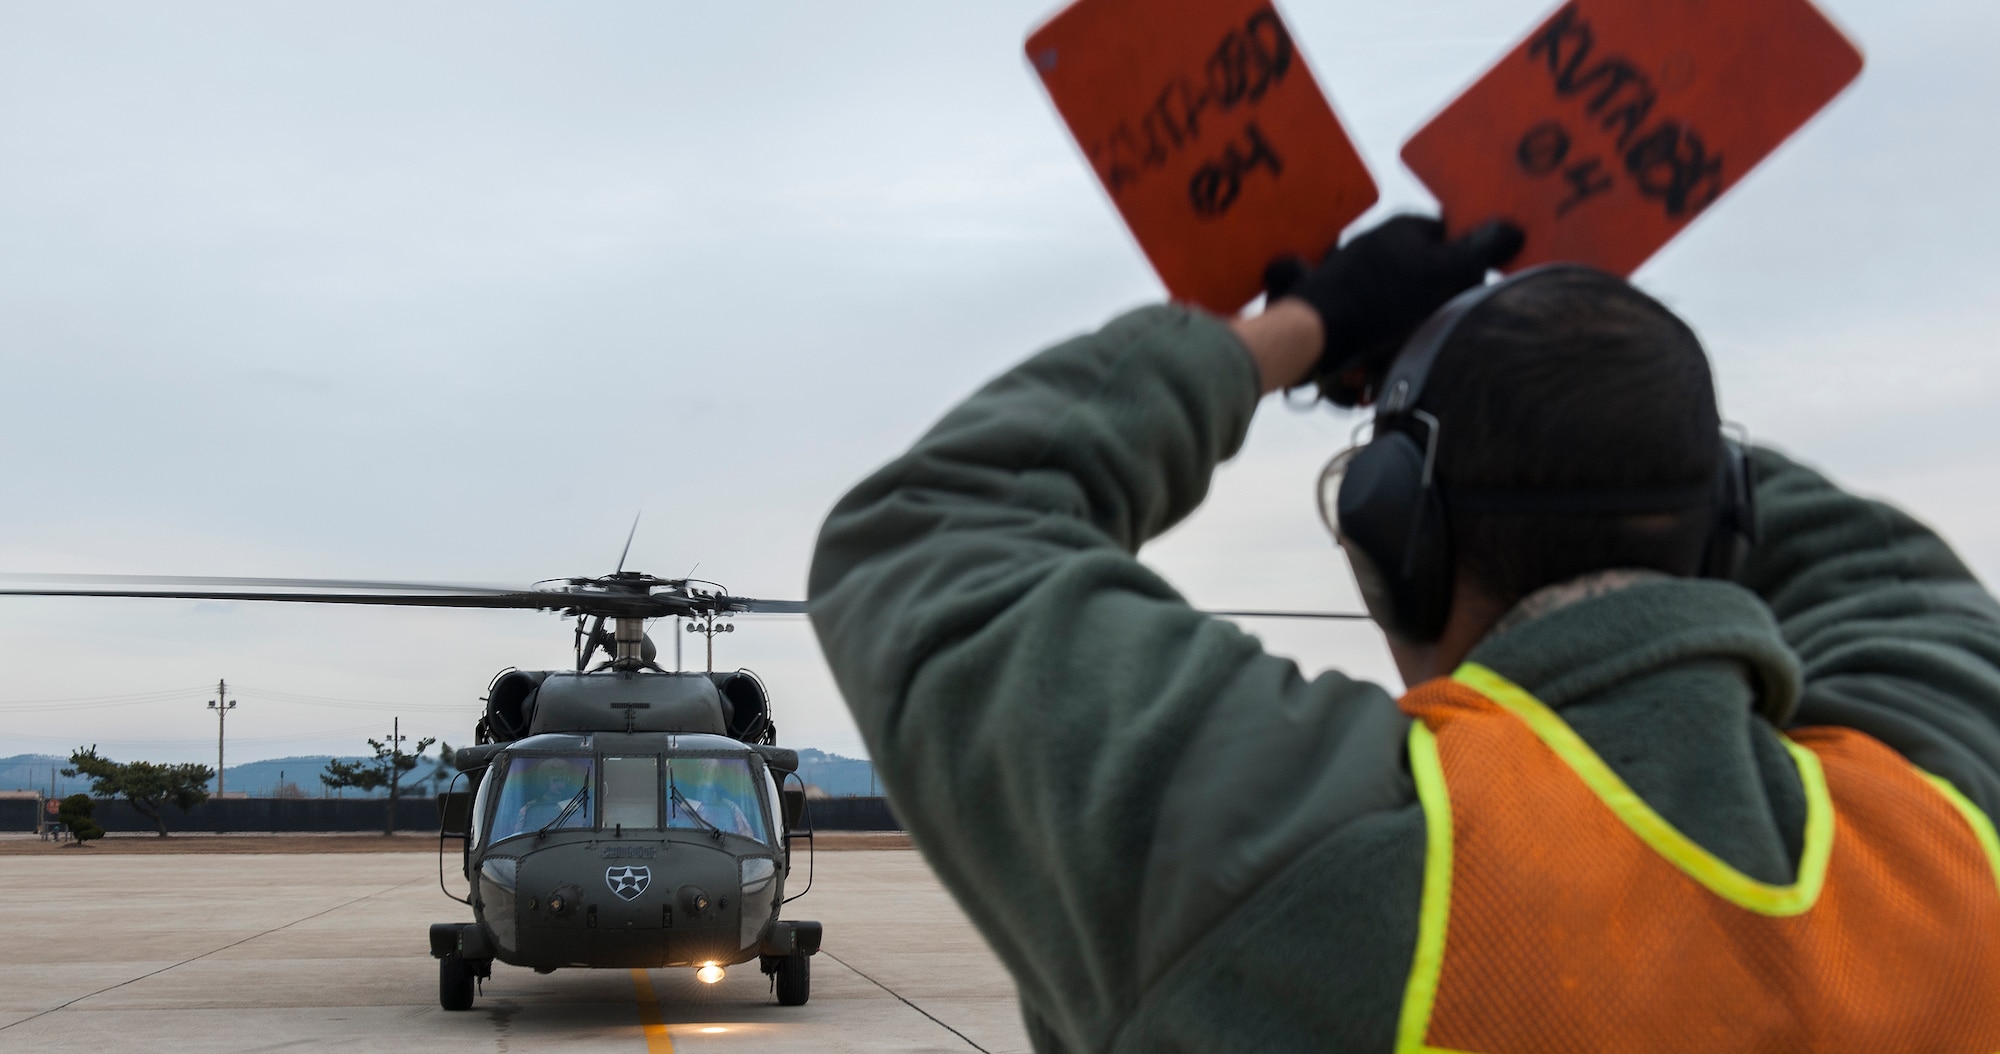 Senior Airman Collin Hubbard, 8th Maintenance Squadron transient assistance crash recovery journeyman, marshals a U8 60 Lima Blackhawk from K16 Airfield, Seoul Air Base, at Kunsan Air Base, Republic of Korea, Jan. 7, 2016. Hubbard works in the maintenance flight, which encompasses multiple duty sections, including a tire shop, aerospace propulsion, crash damage, aircraft recovery and phase. (U.S. Air Force photo by Staff Sgt. Nick Wilson/Released)